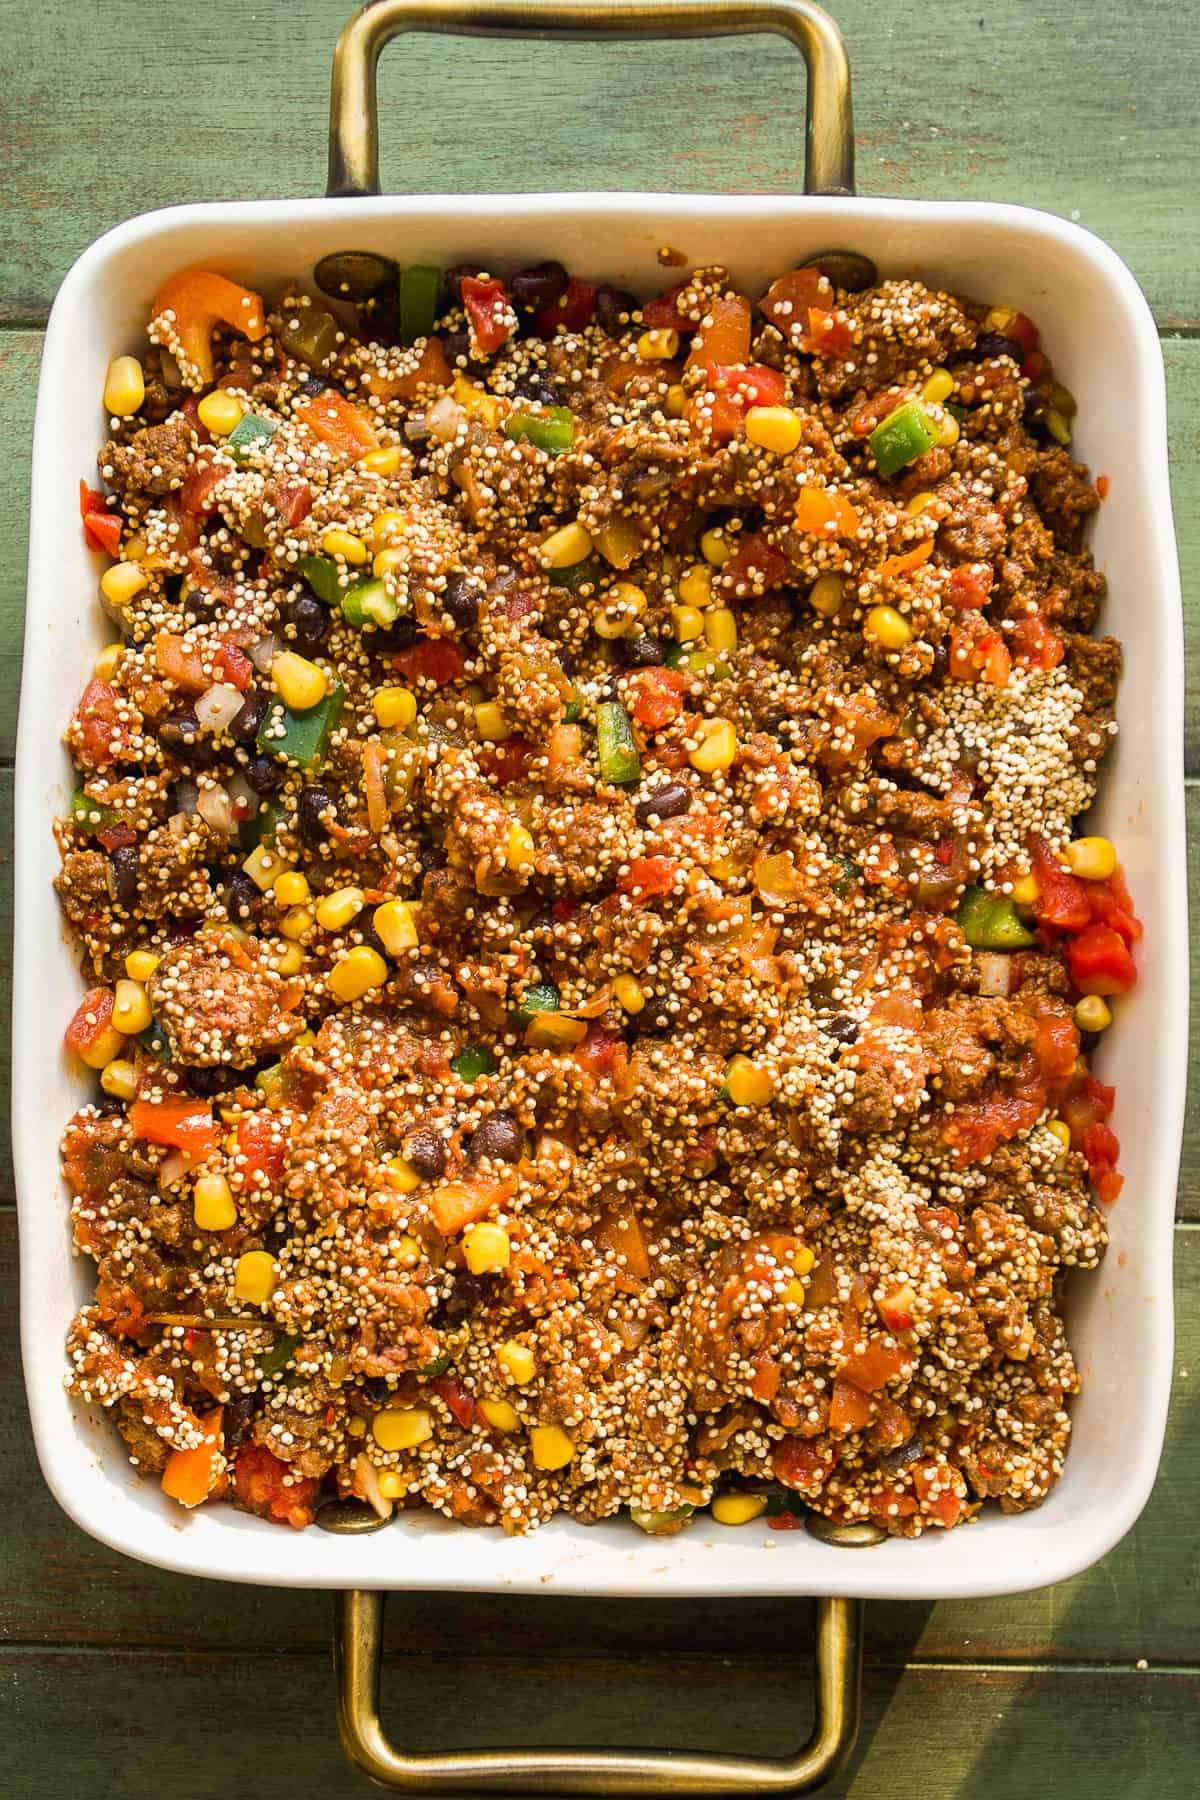 Taco casserole with quinoa about to be baked.